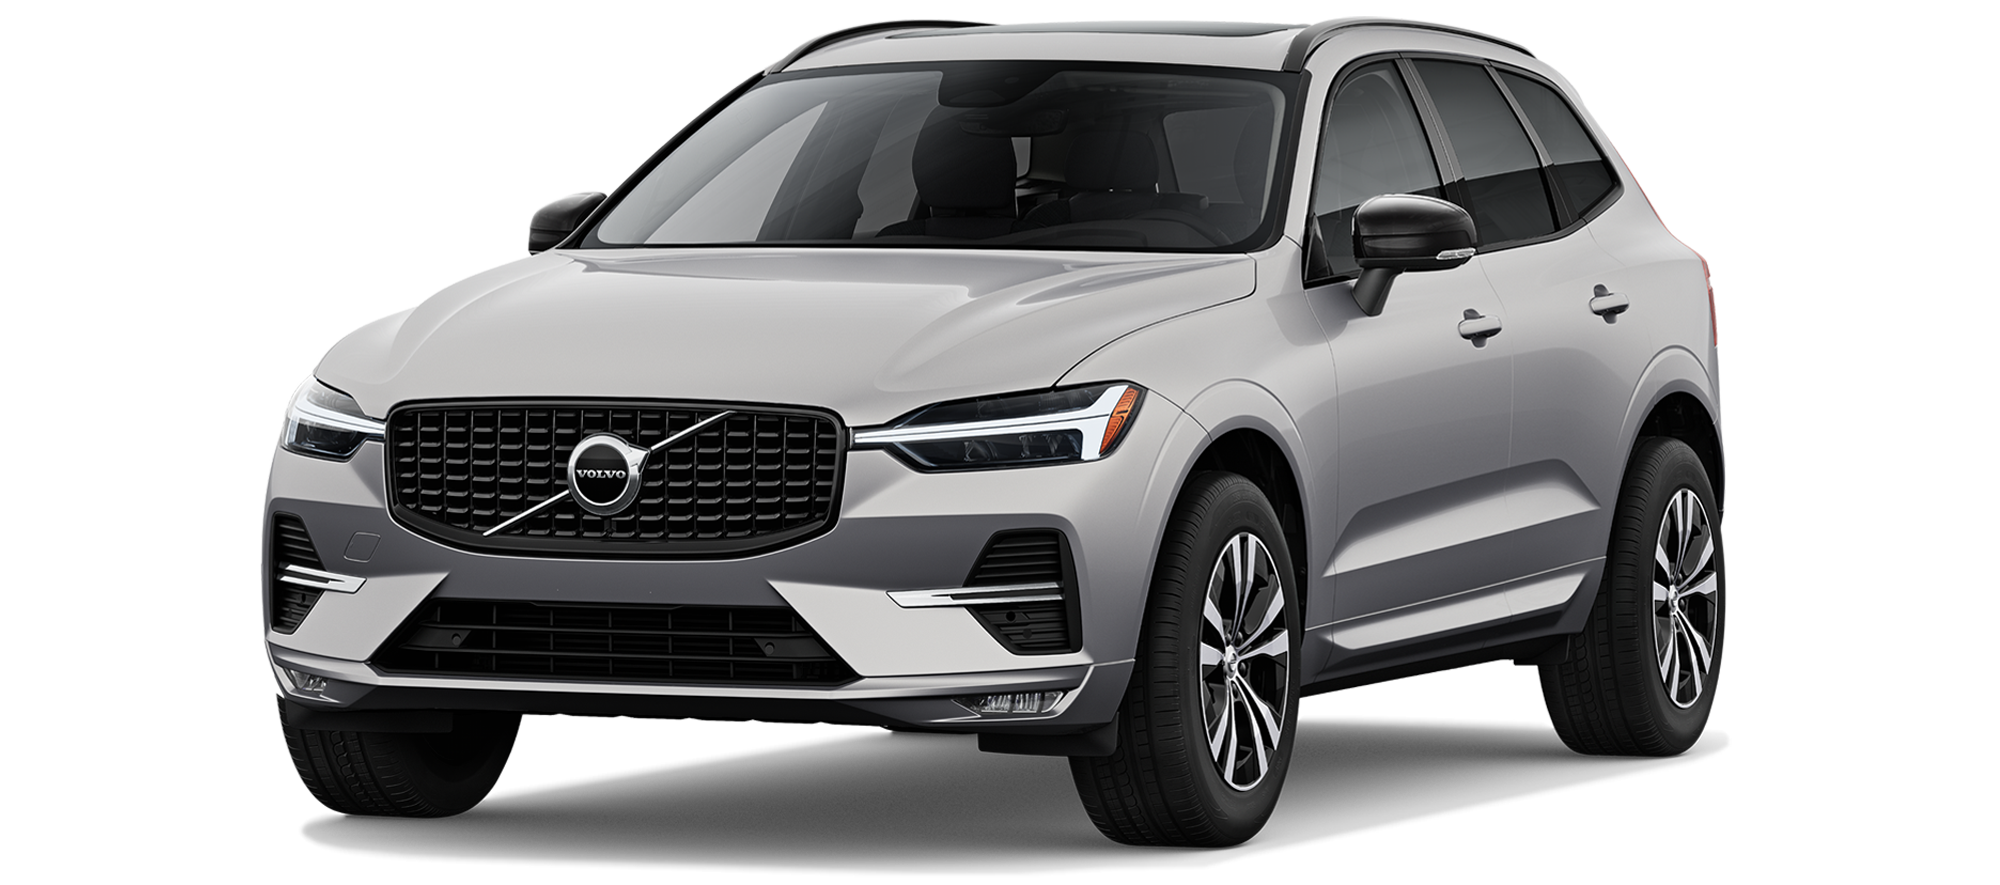 Volvo Cars Hudson Valley  New Volvo dealership in Wappingers Falls, NY  12590 Volvo XC90 lease deals, Volvo S90 lease